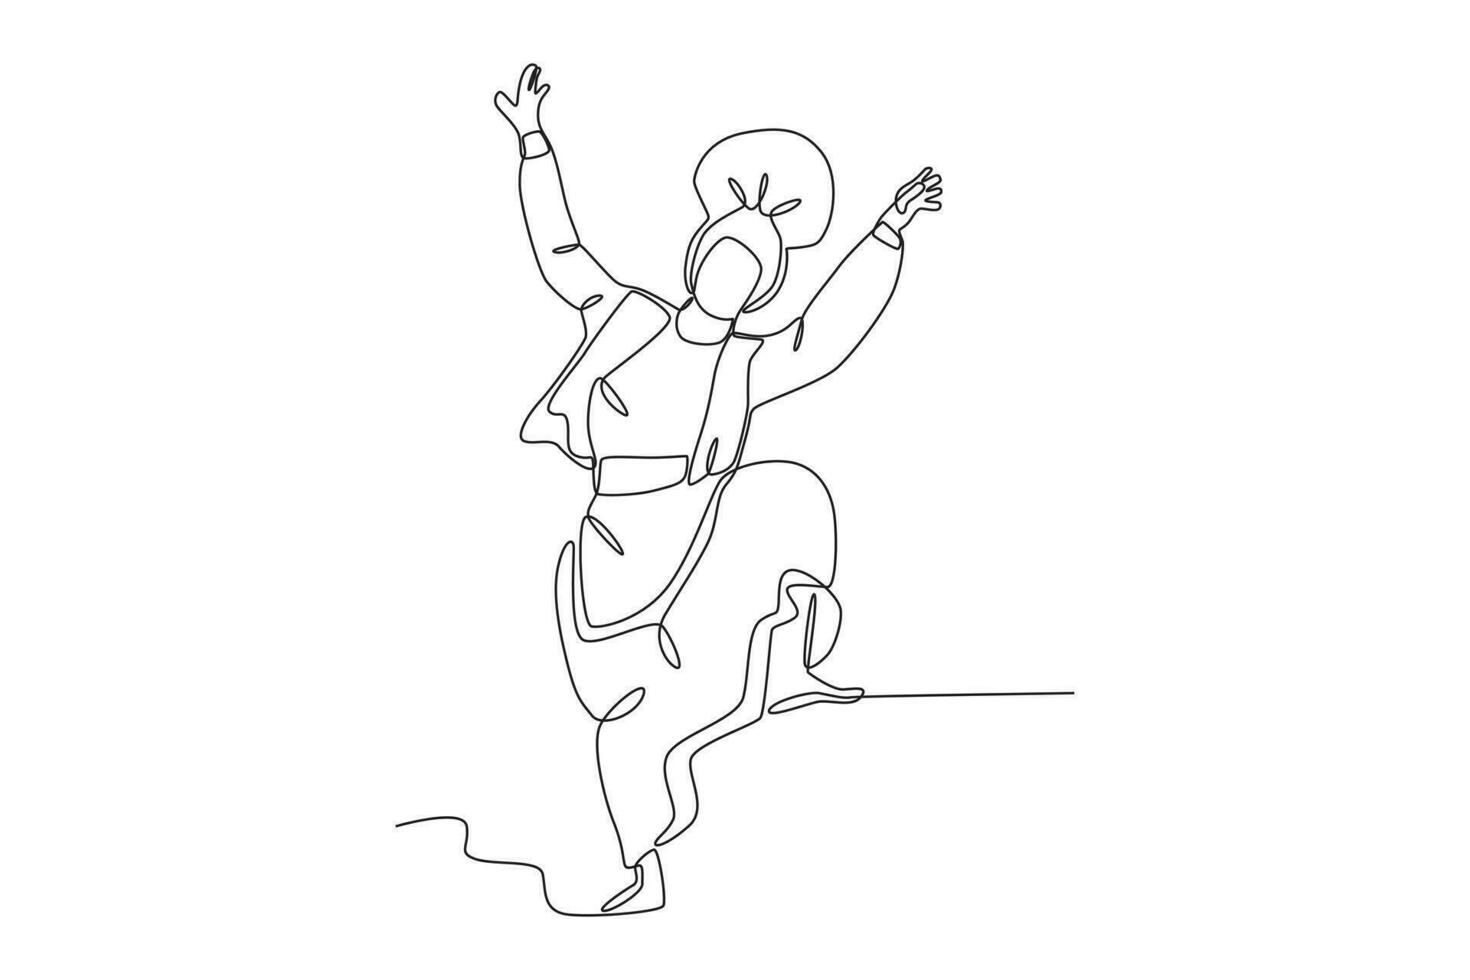 A dancer raises his hand and one foot vector